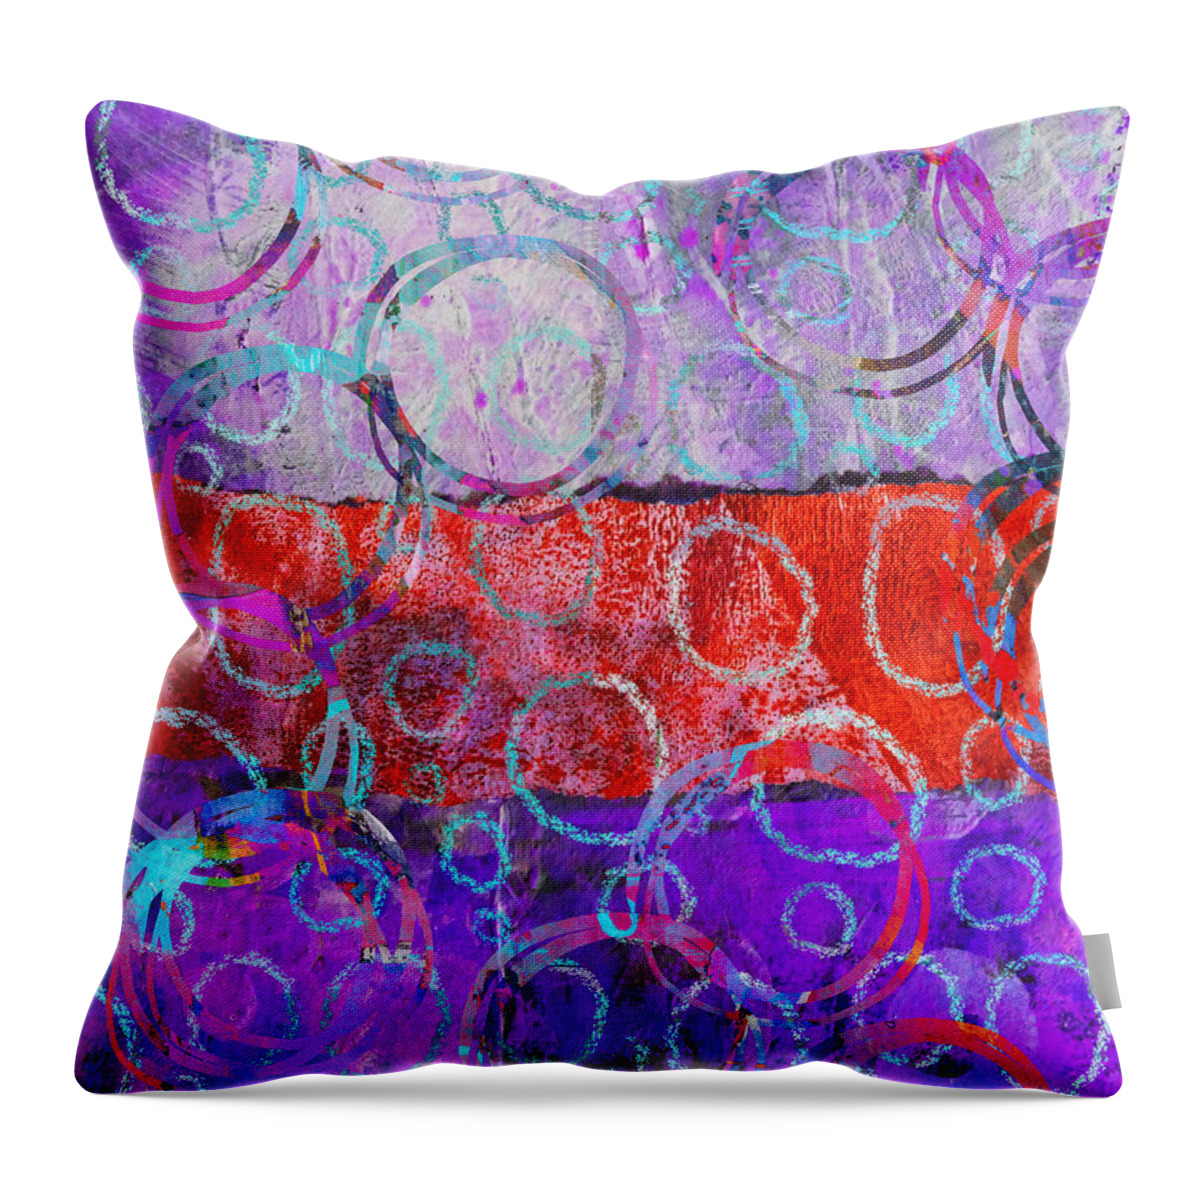 Abstract Collage Throw Pillow featuring the mixed media Circle Dance 2 by Nancy Merkle